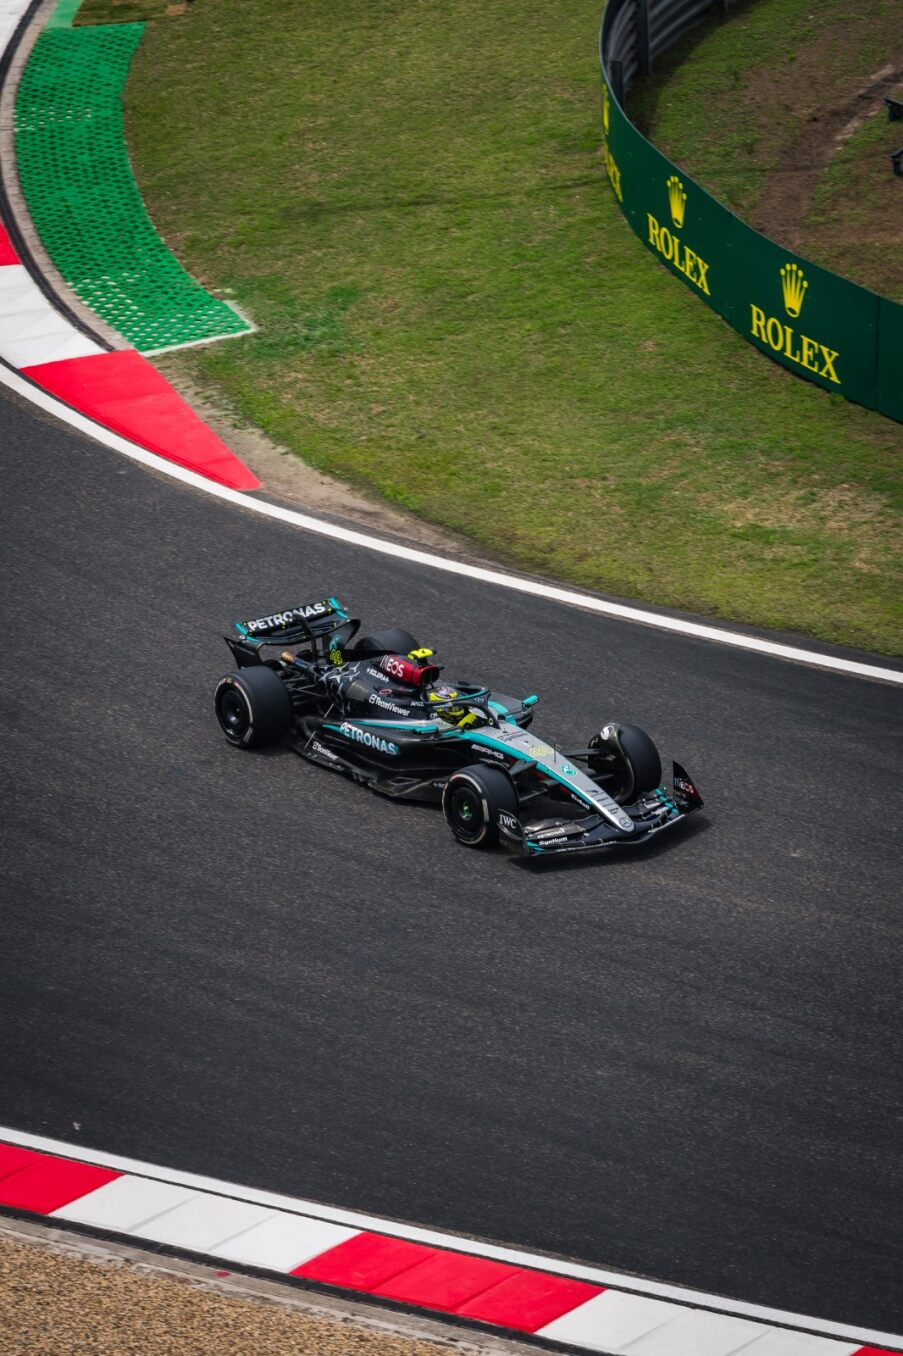 This year’s F1 Shanghai race sold out at an unprecedented speed. Image: F1